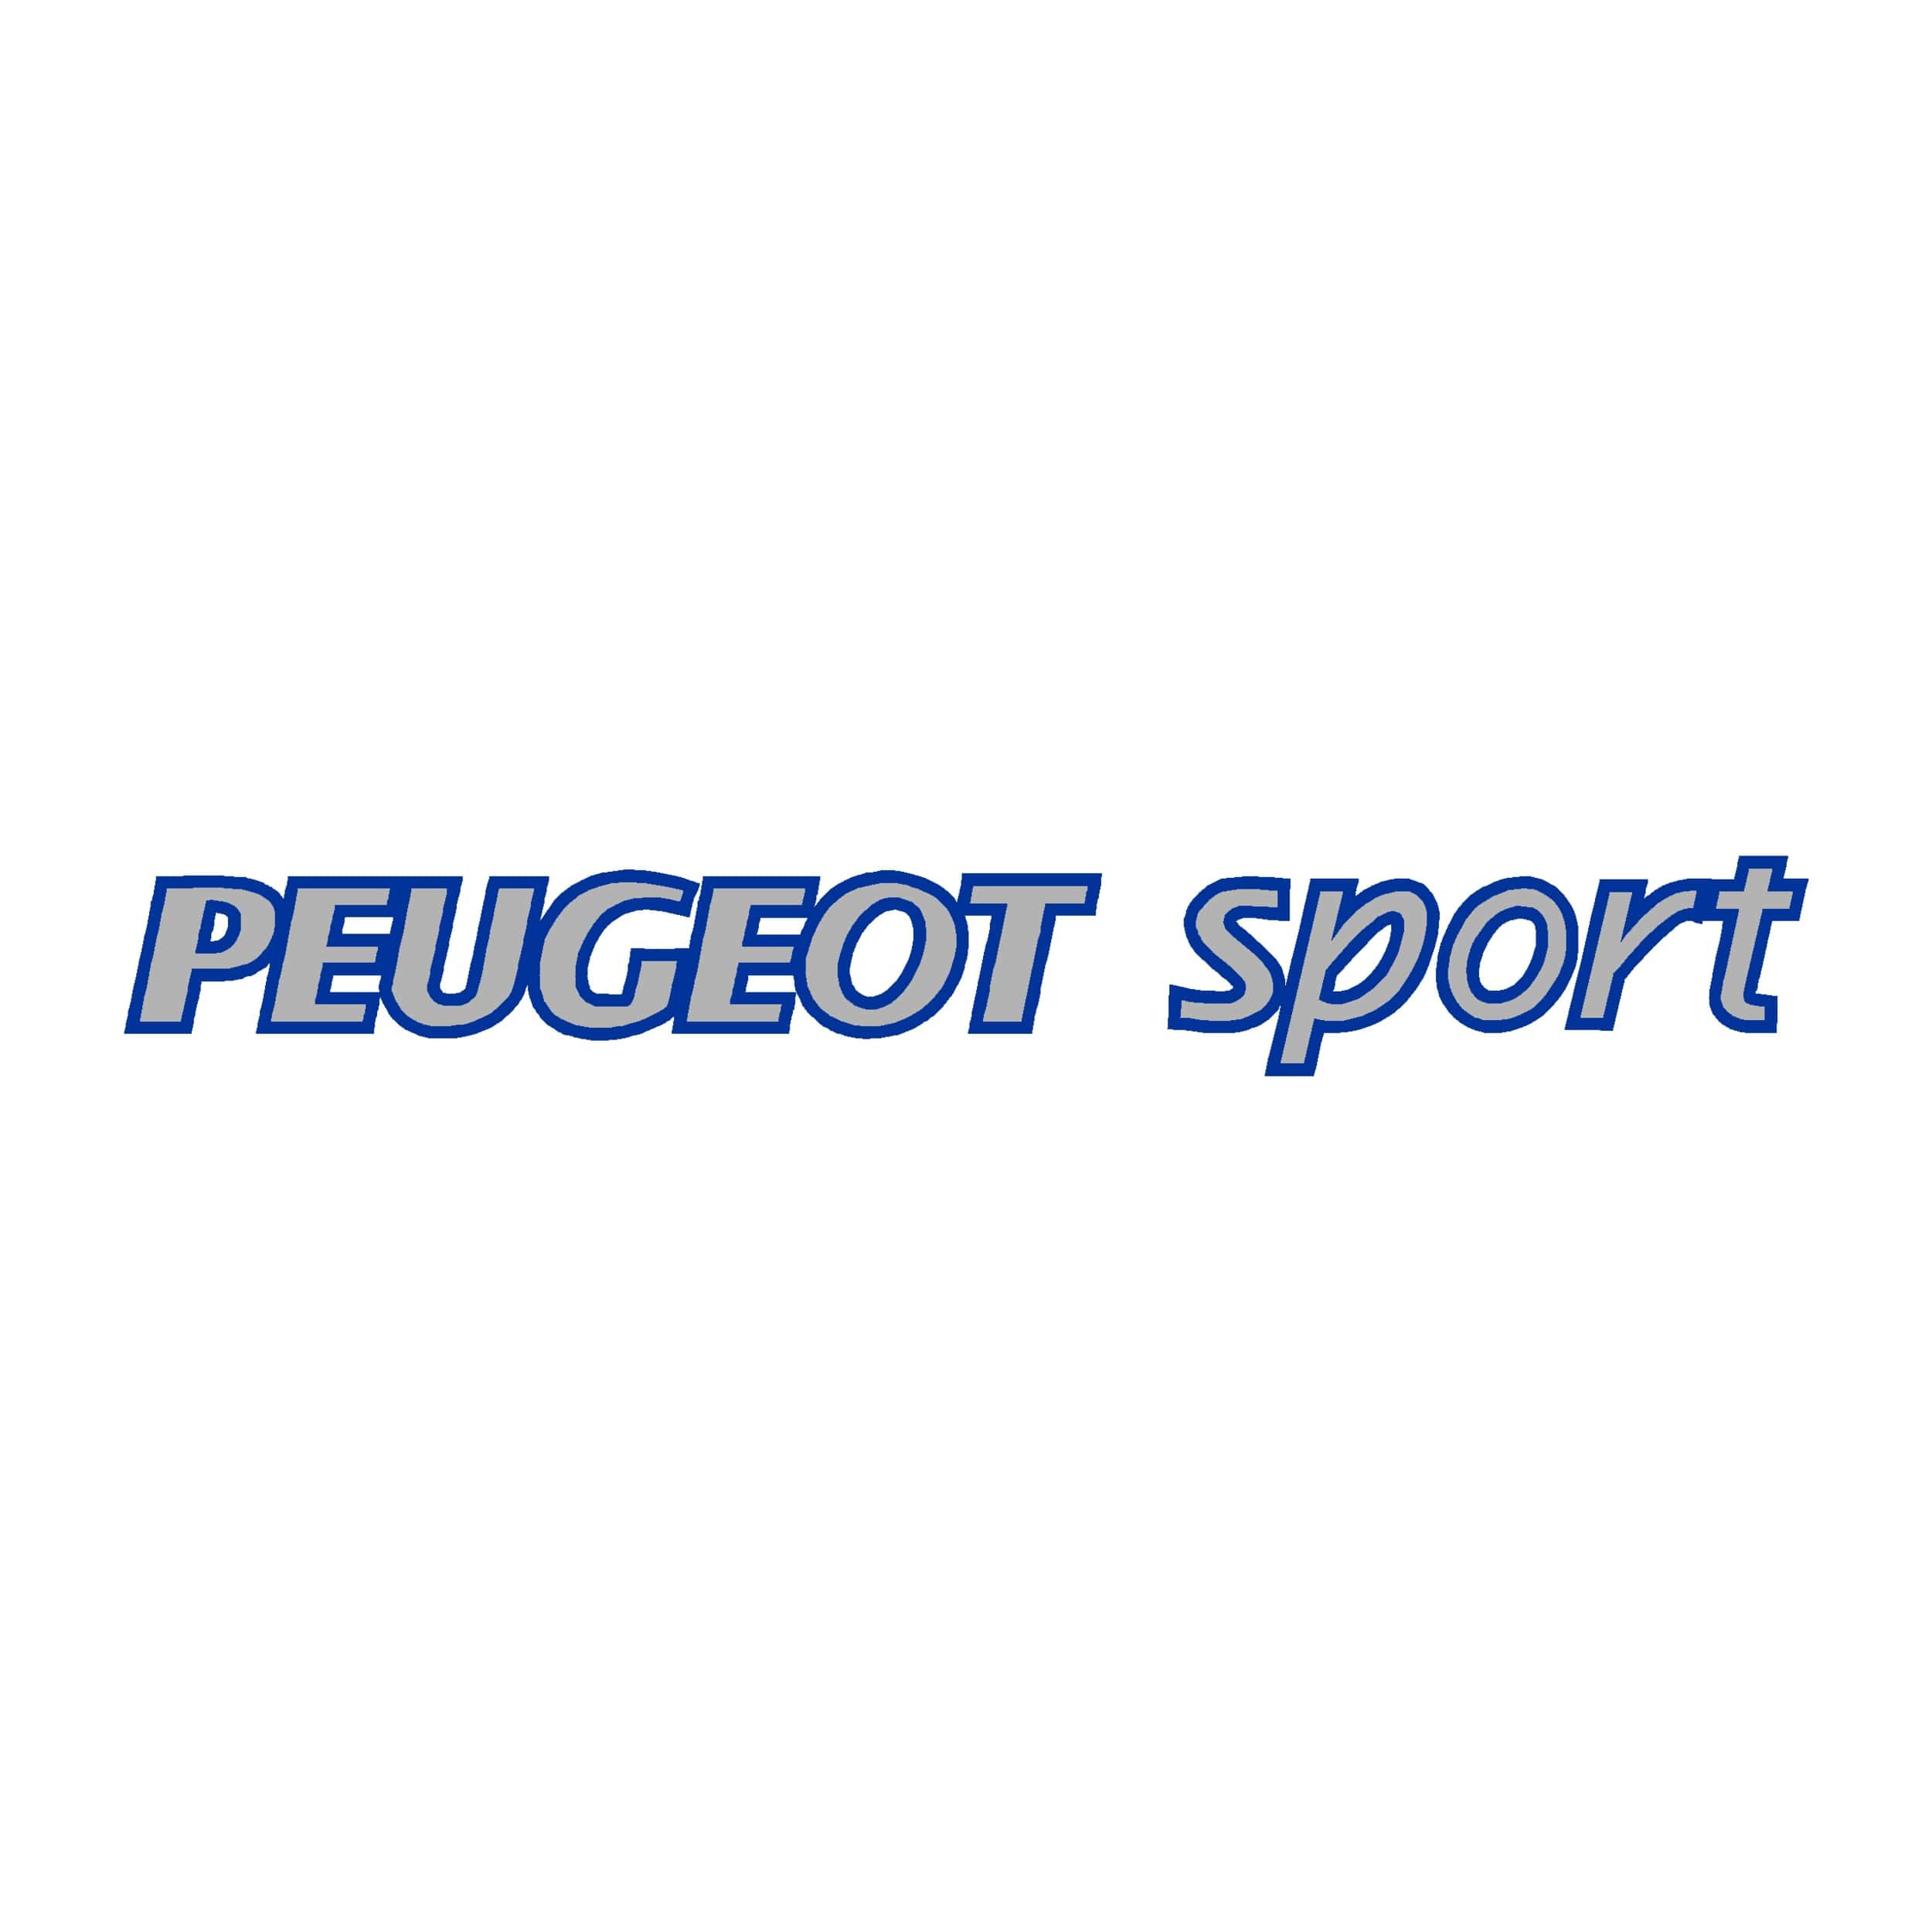 stickers-peugeot-sport-ref-3-autocolant-adhesif-racing-auto-tuning-ralllye-competition-sticker-deco-adhesive-voiture-min